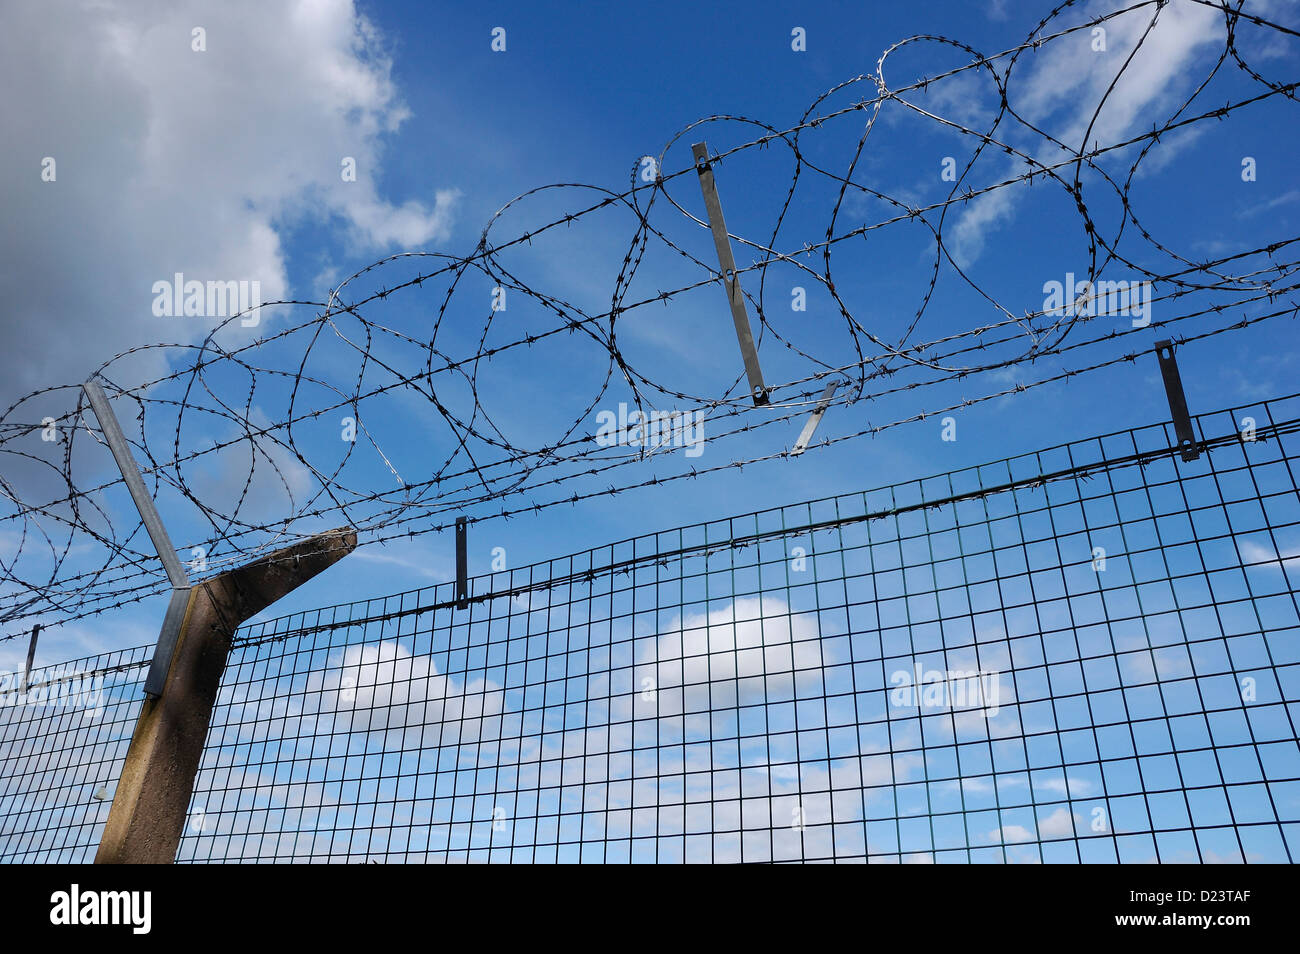 Security fencing with razor-wire against a blue and cloudy sky Stock Photo